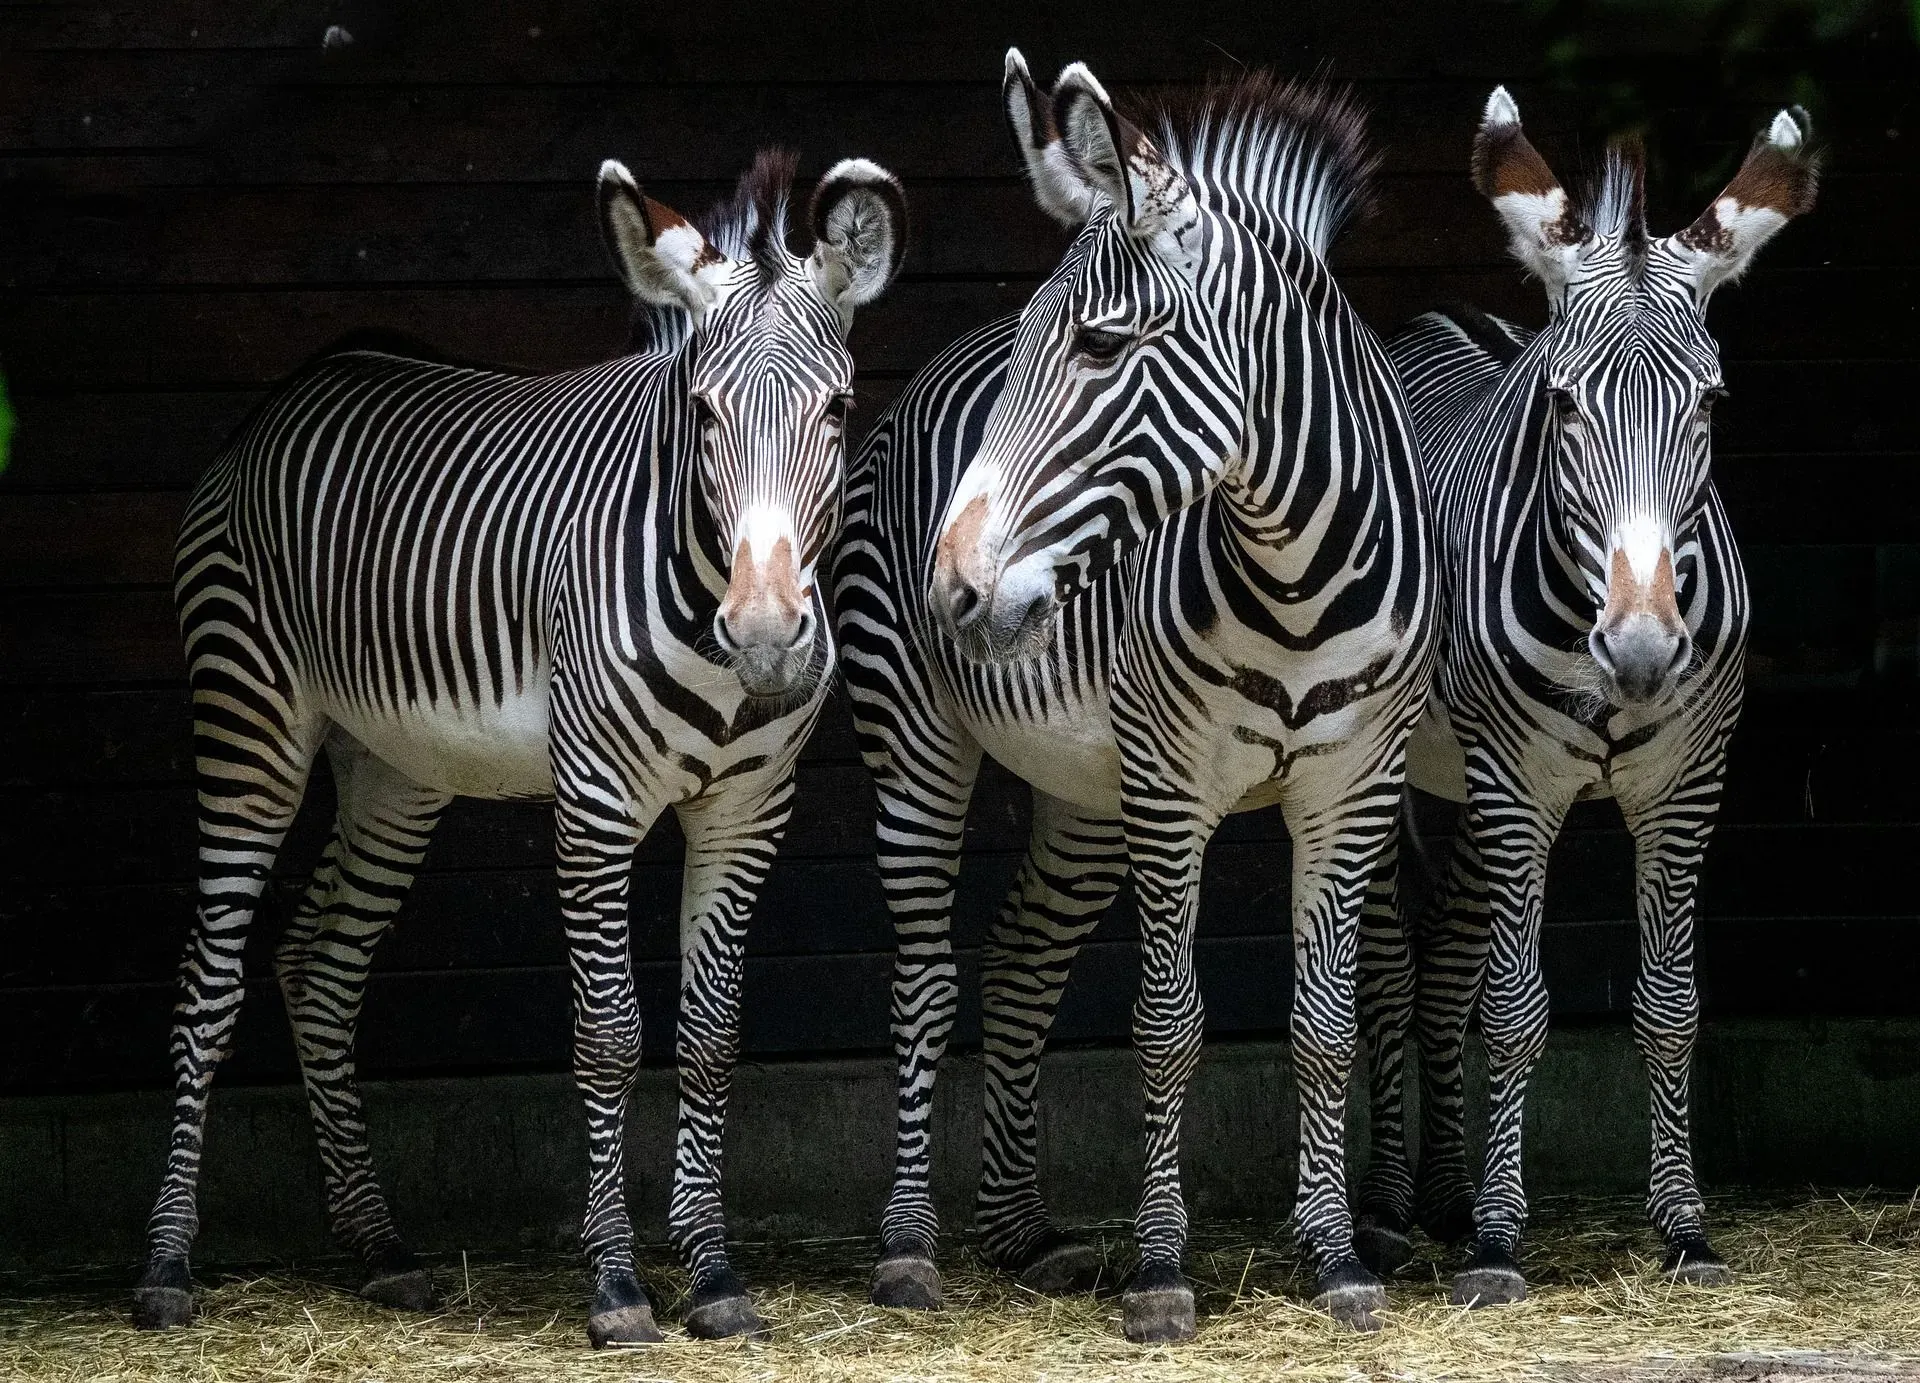 During an African safari, we all wonder: are zebras white with black stripes?